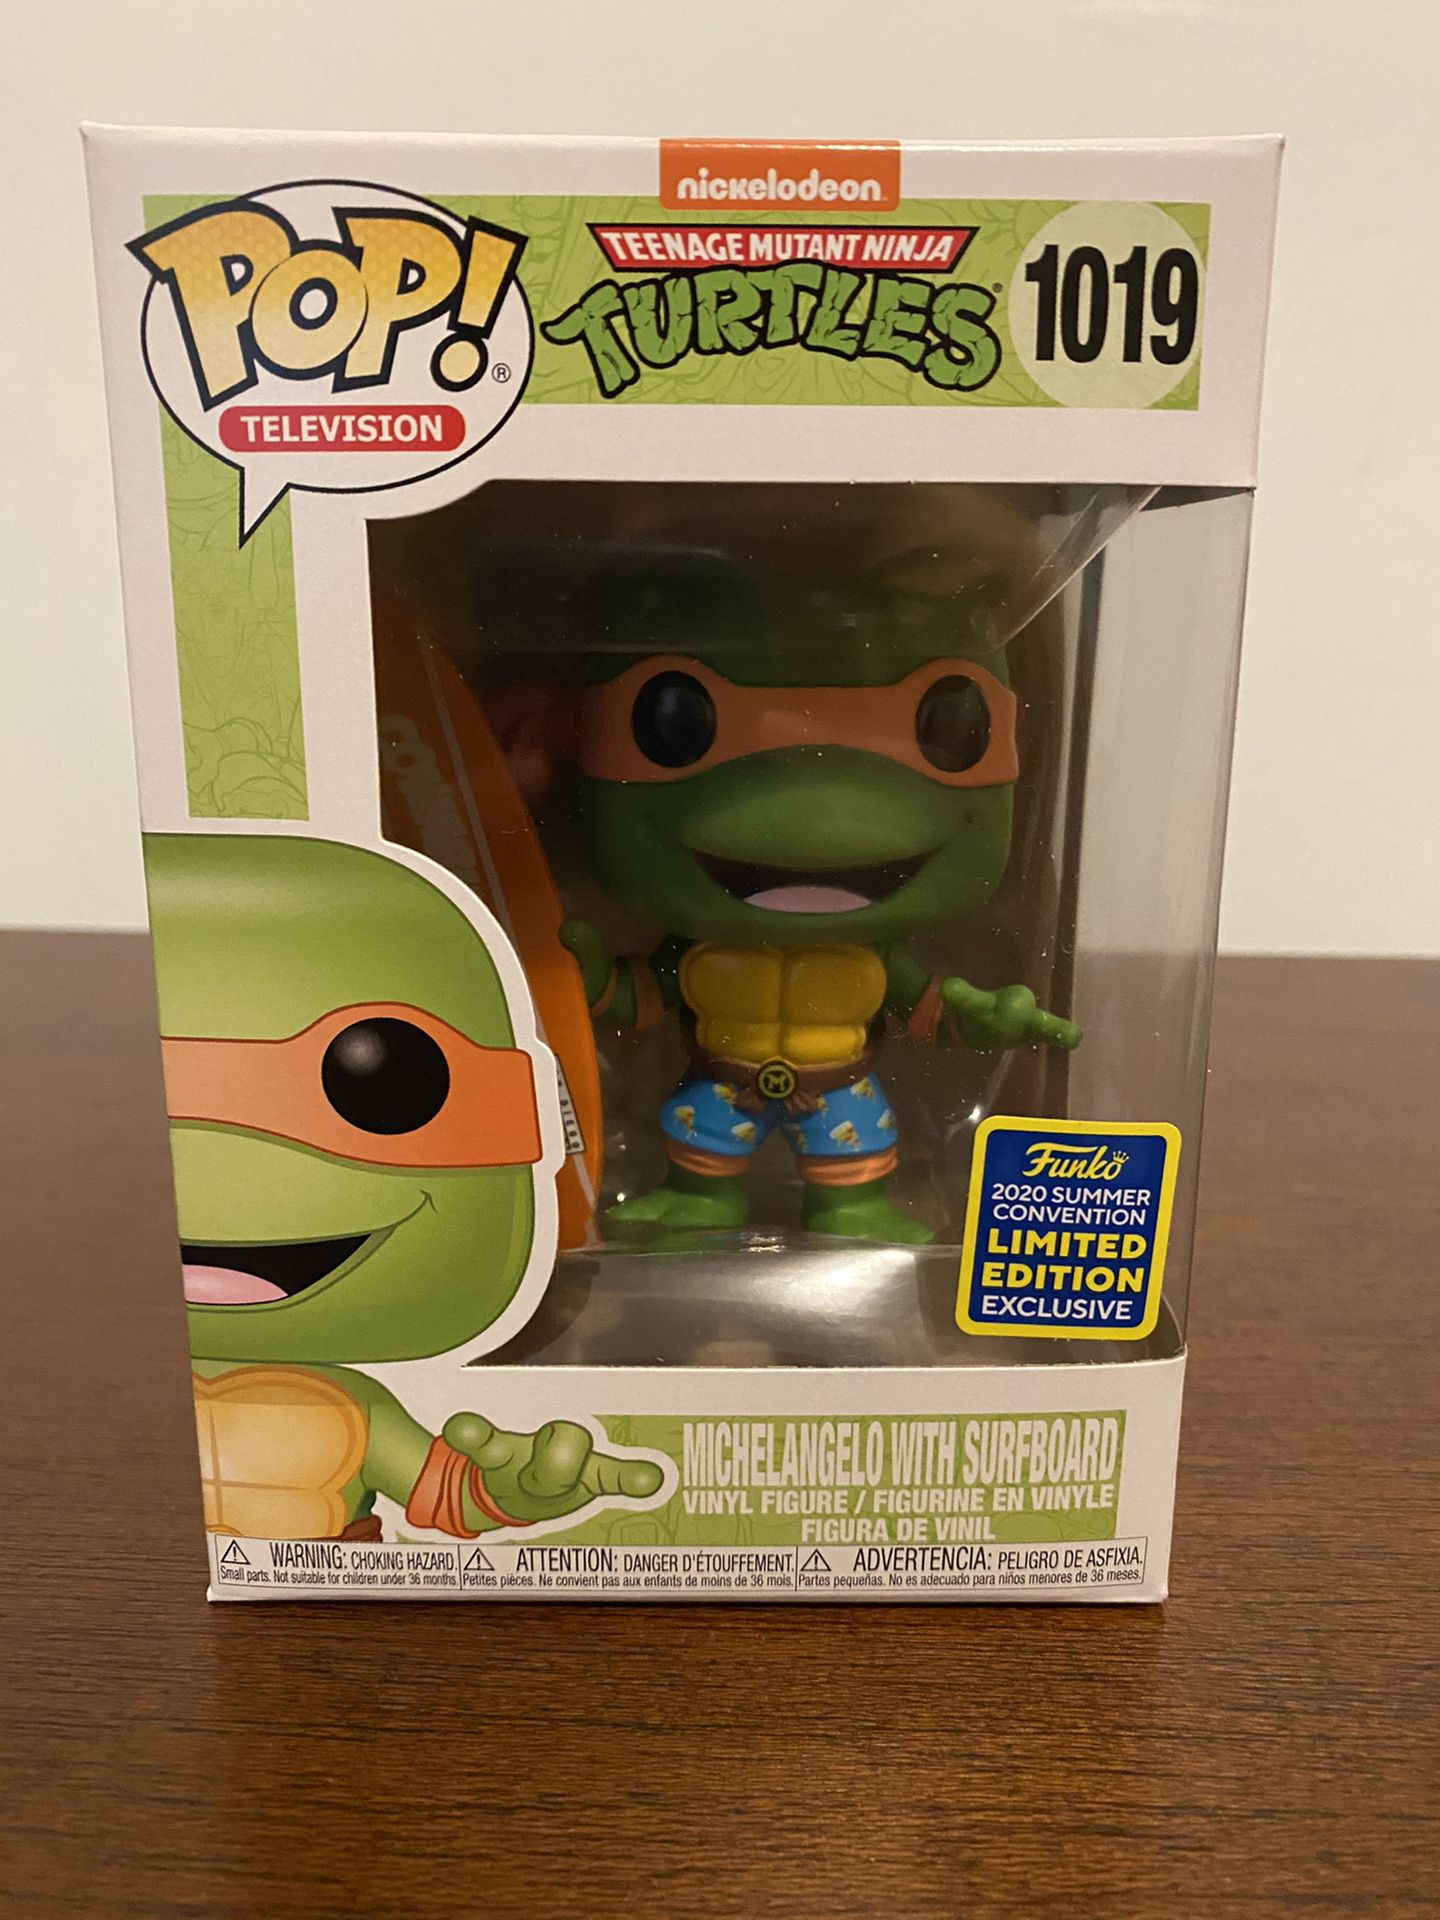 SDCC 2020 Michelangelo with Surfboard